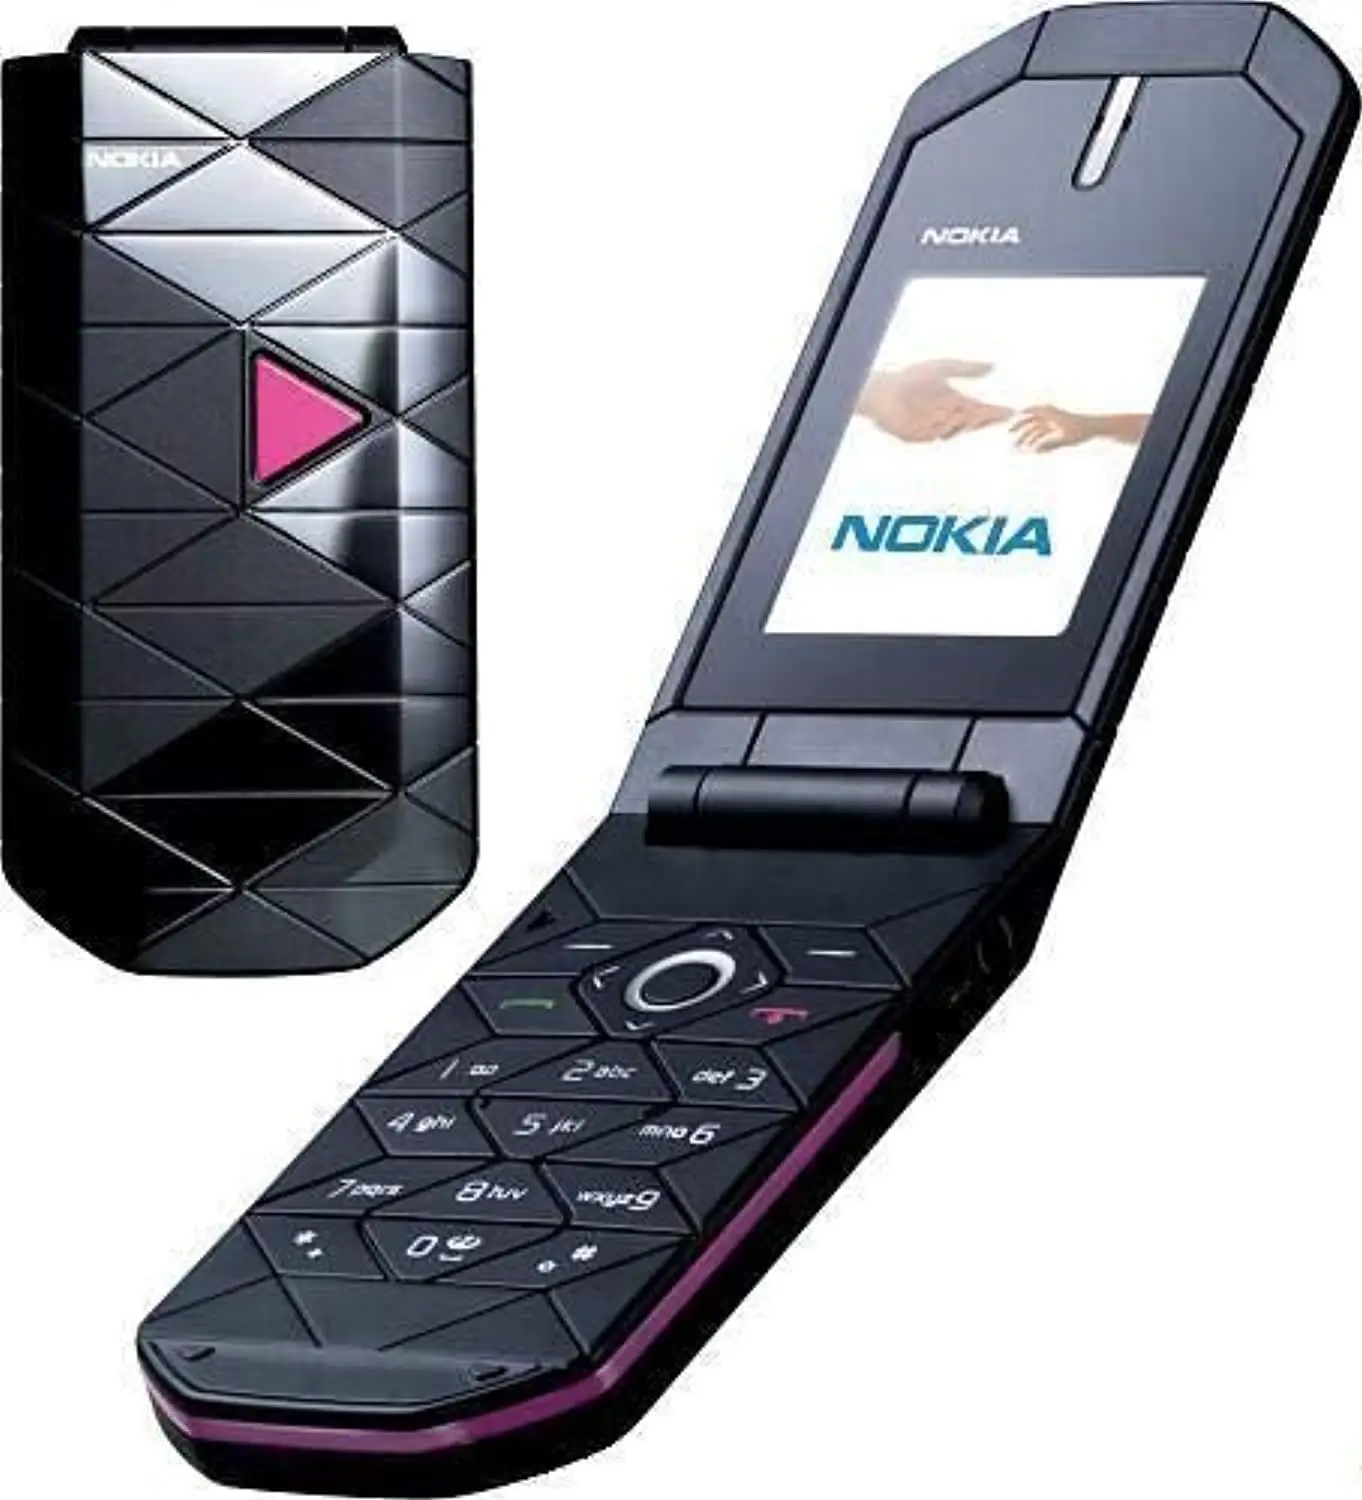 second-hand mobile phone for nokia 7070 prism second hand cellphone high quality flip phone wholesale cheap price fast delivery